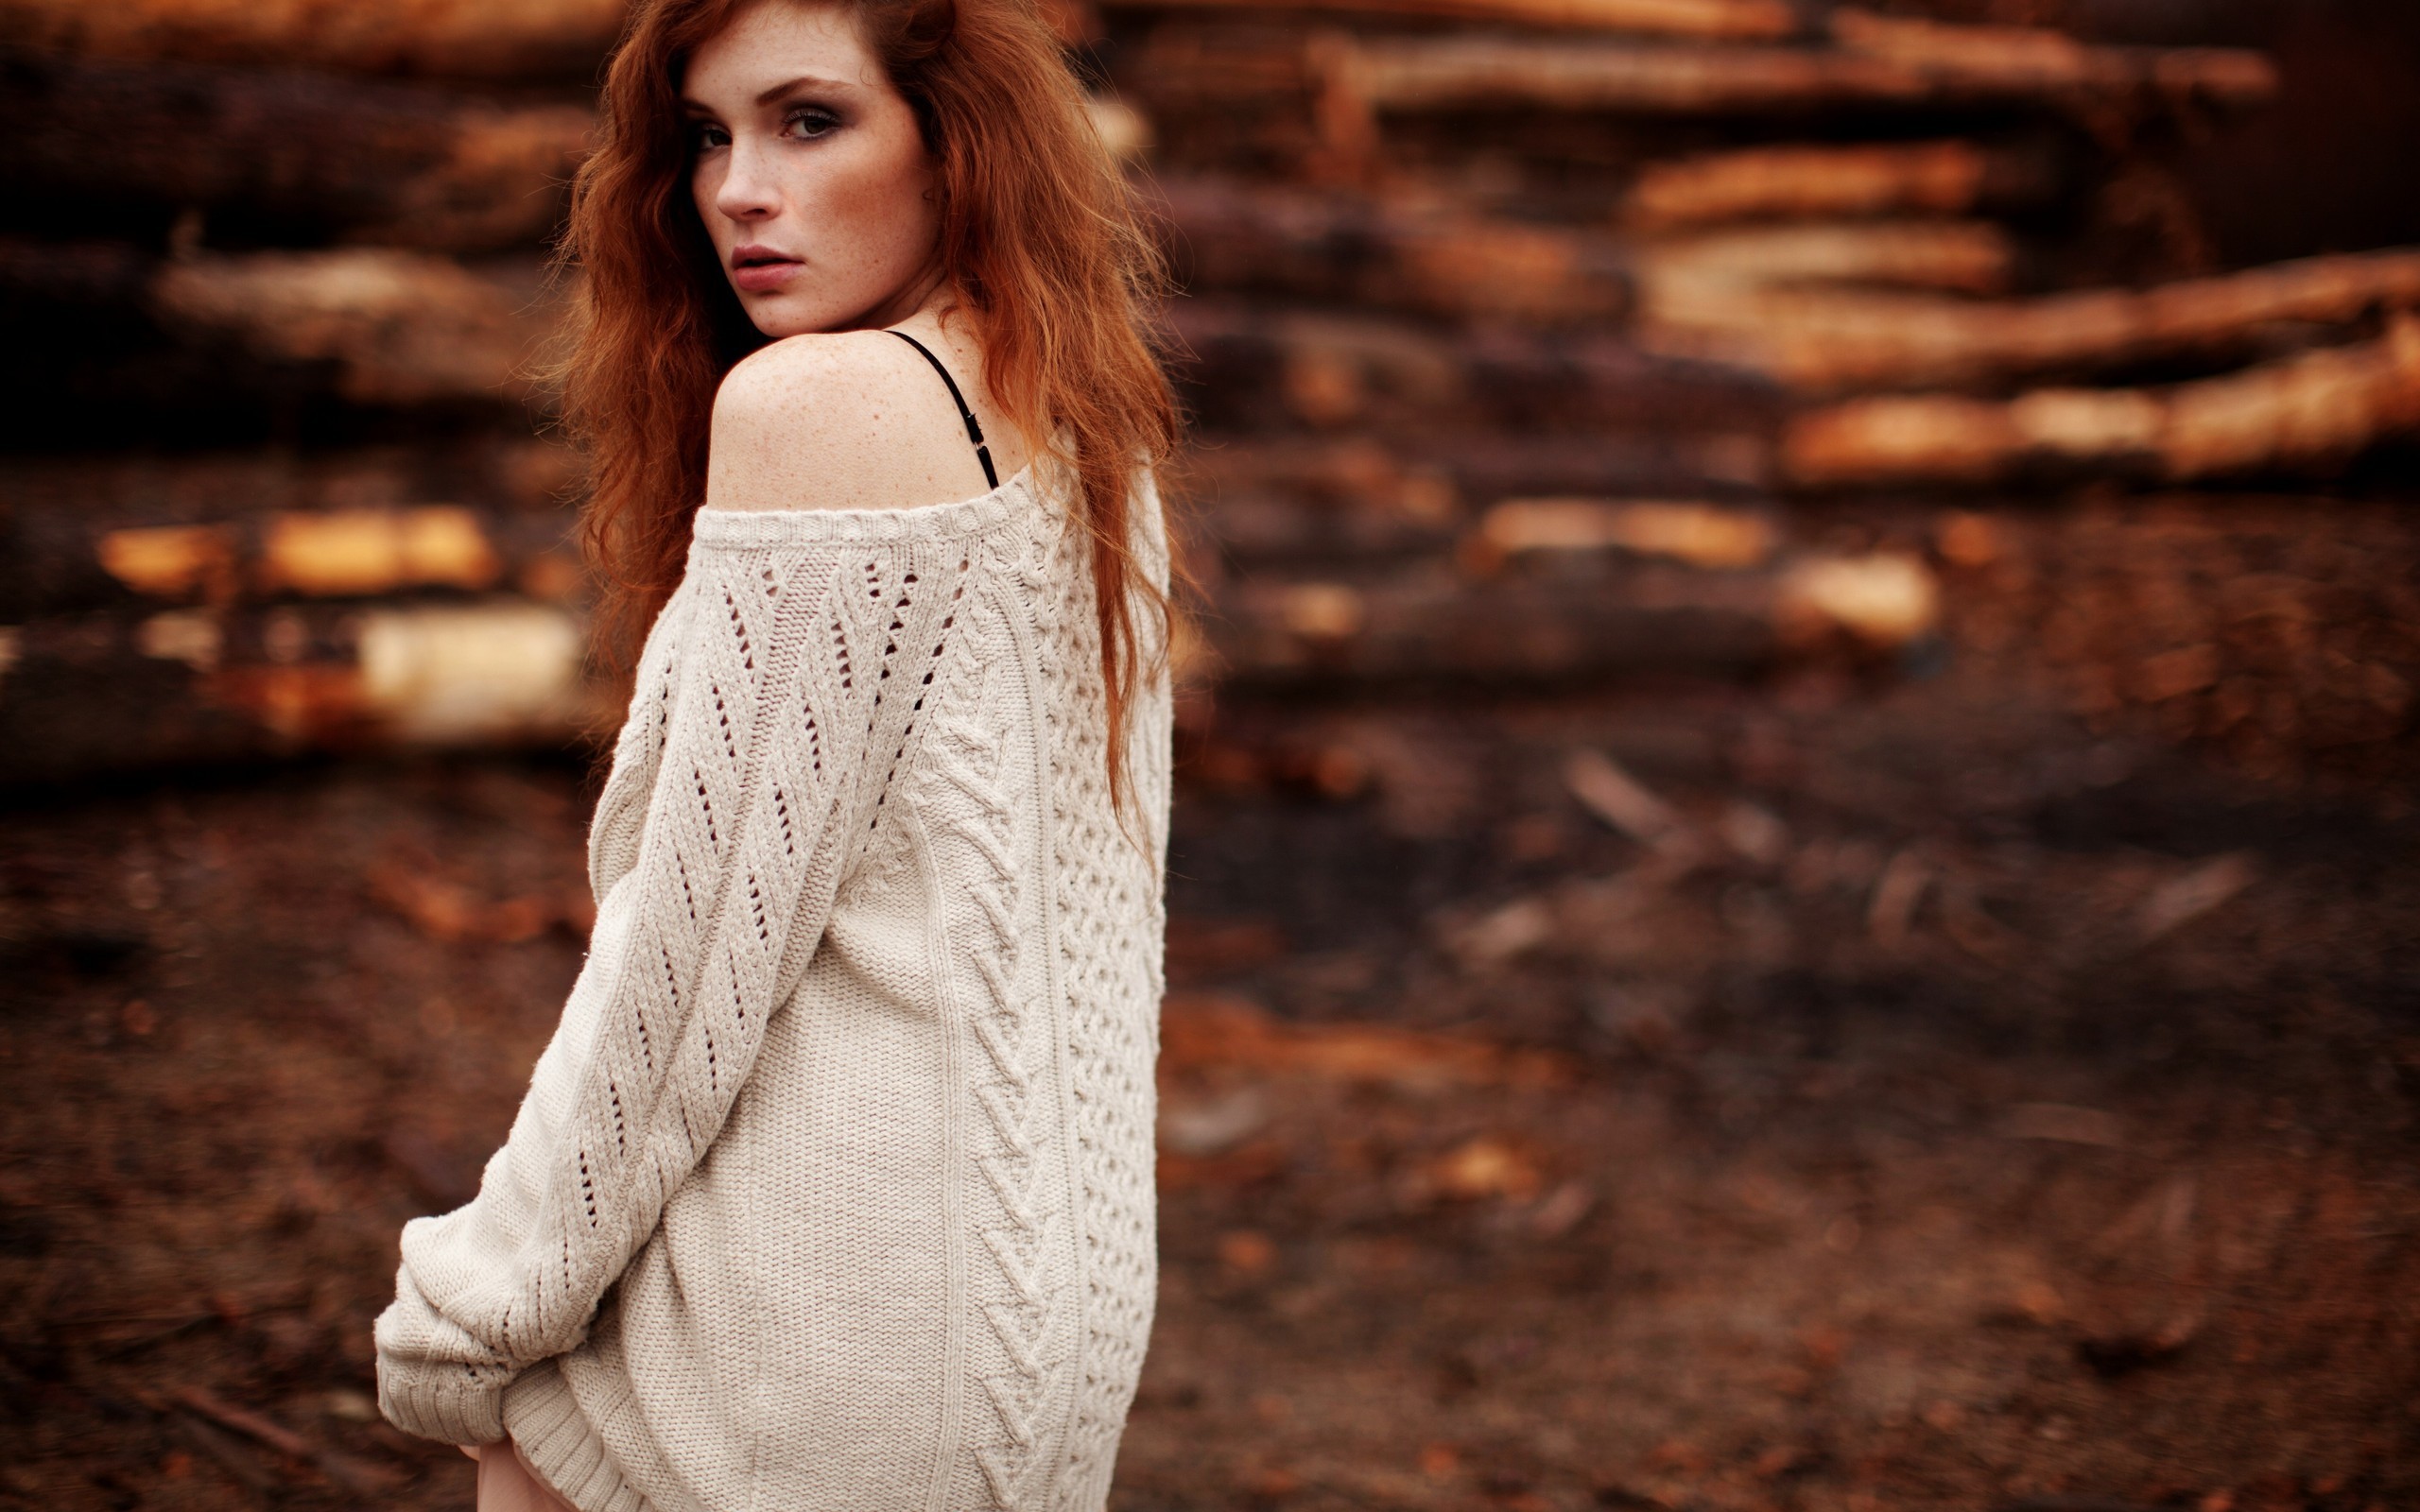 2560x1600 Beautiful Redhead Model wallpapers and stock photos